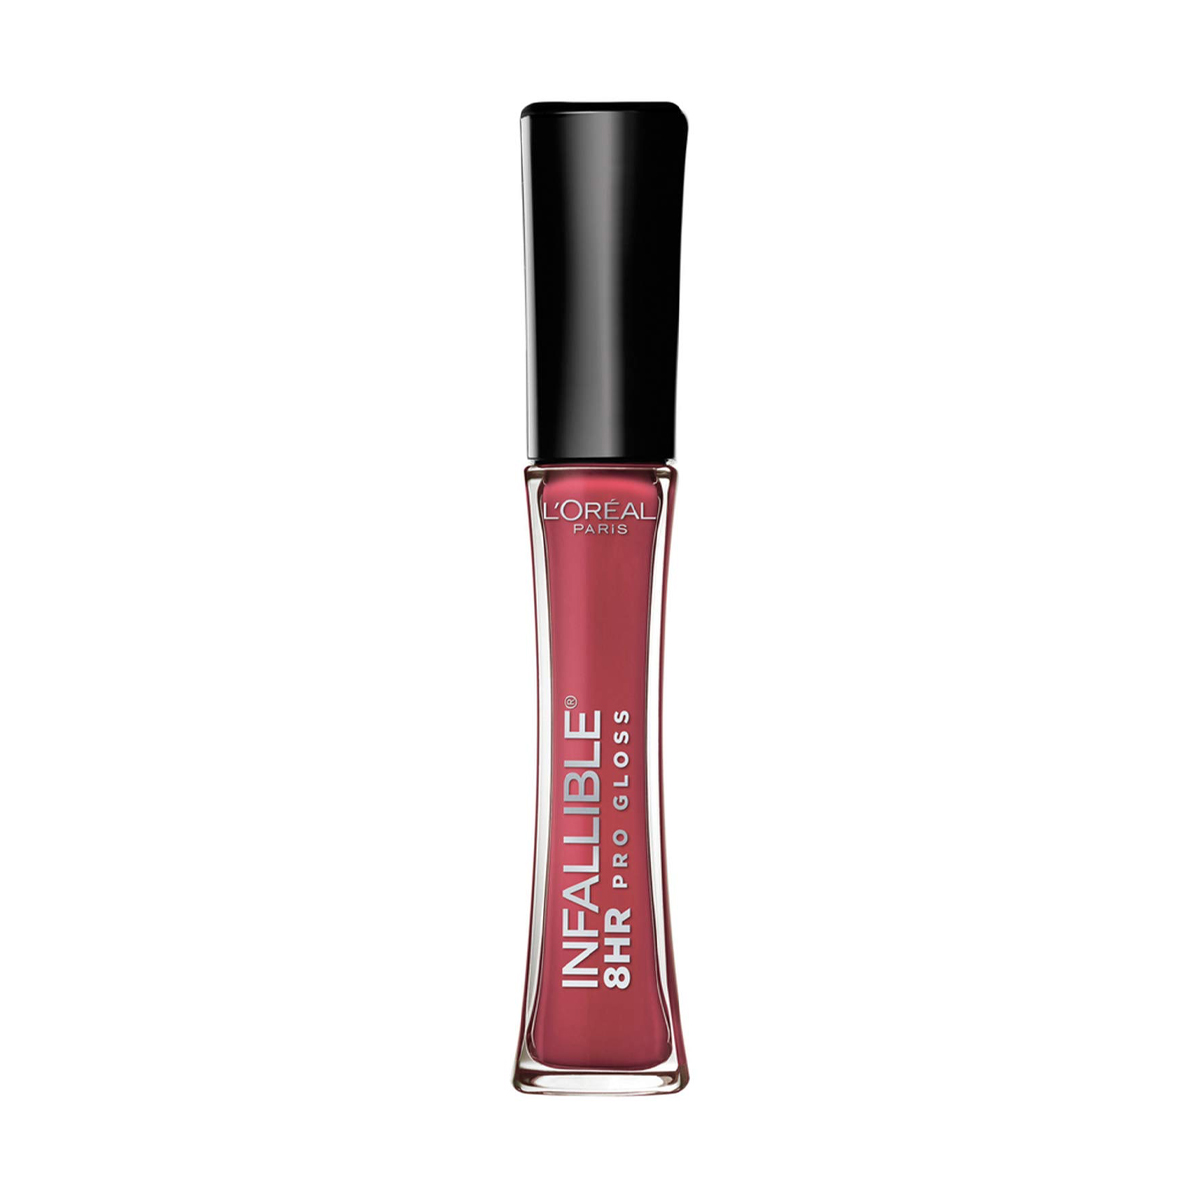 L 'or exceptional Paris Infallible 8-HR PRO Gloss in Bloon'Oréal Paris Infallible 8-HR Pro Gloss in Bloon